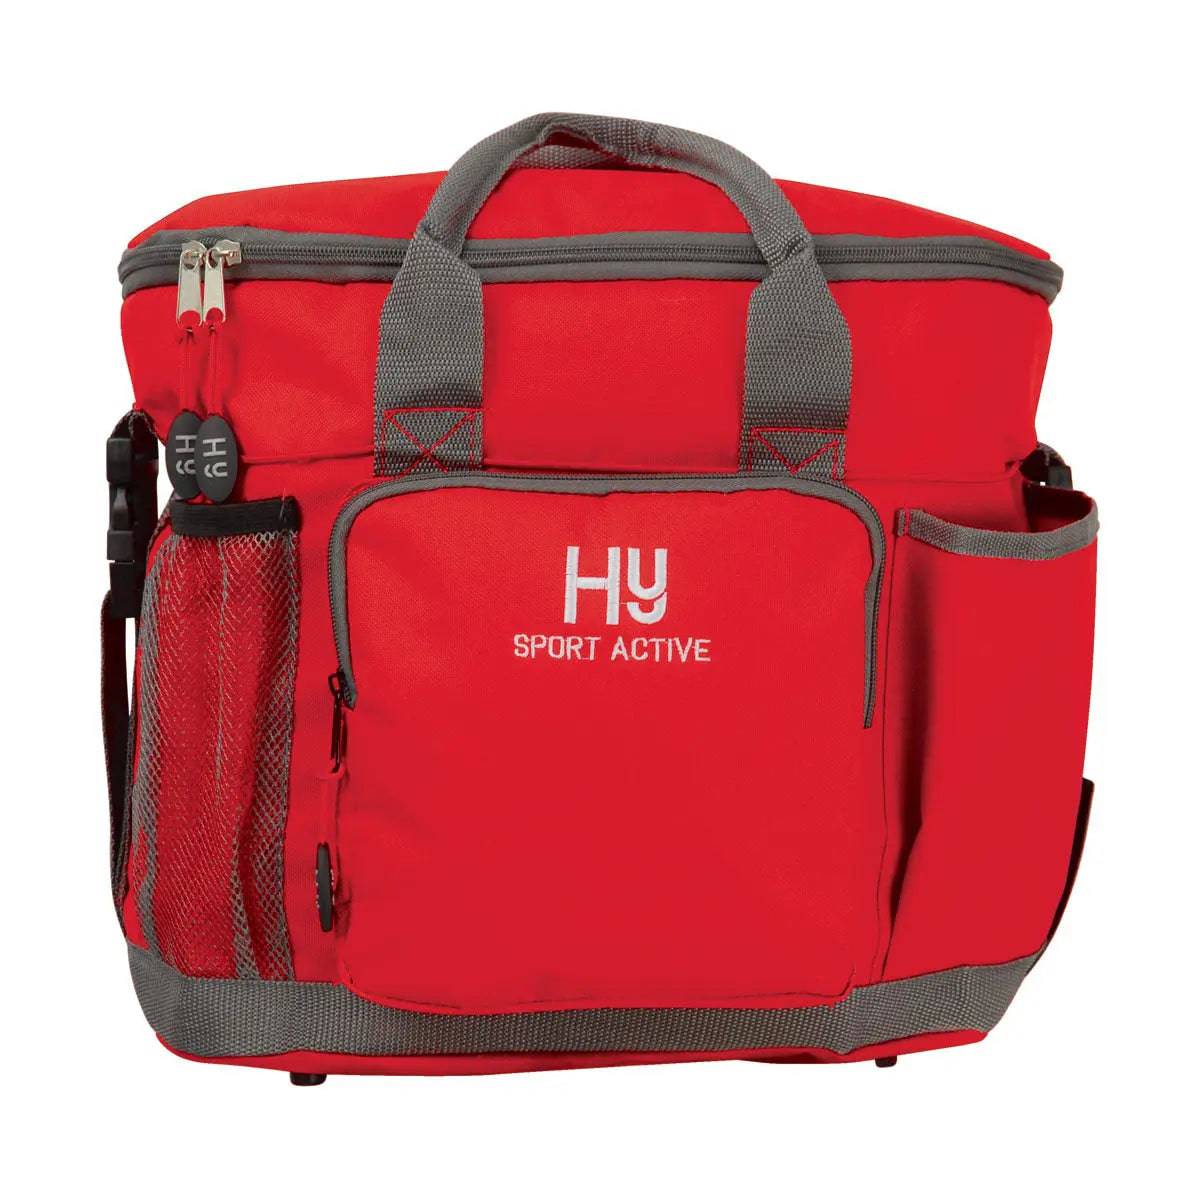 Hy Sport Active Grooming Bag Rosette Red HY Equestrian Grooming Bags, Boxes & Kits Barnstaple Equestrian Supplies